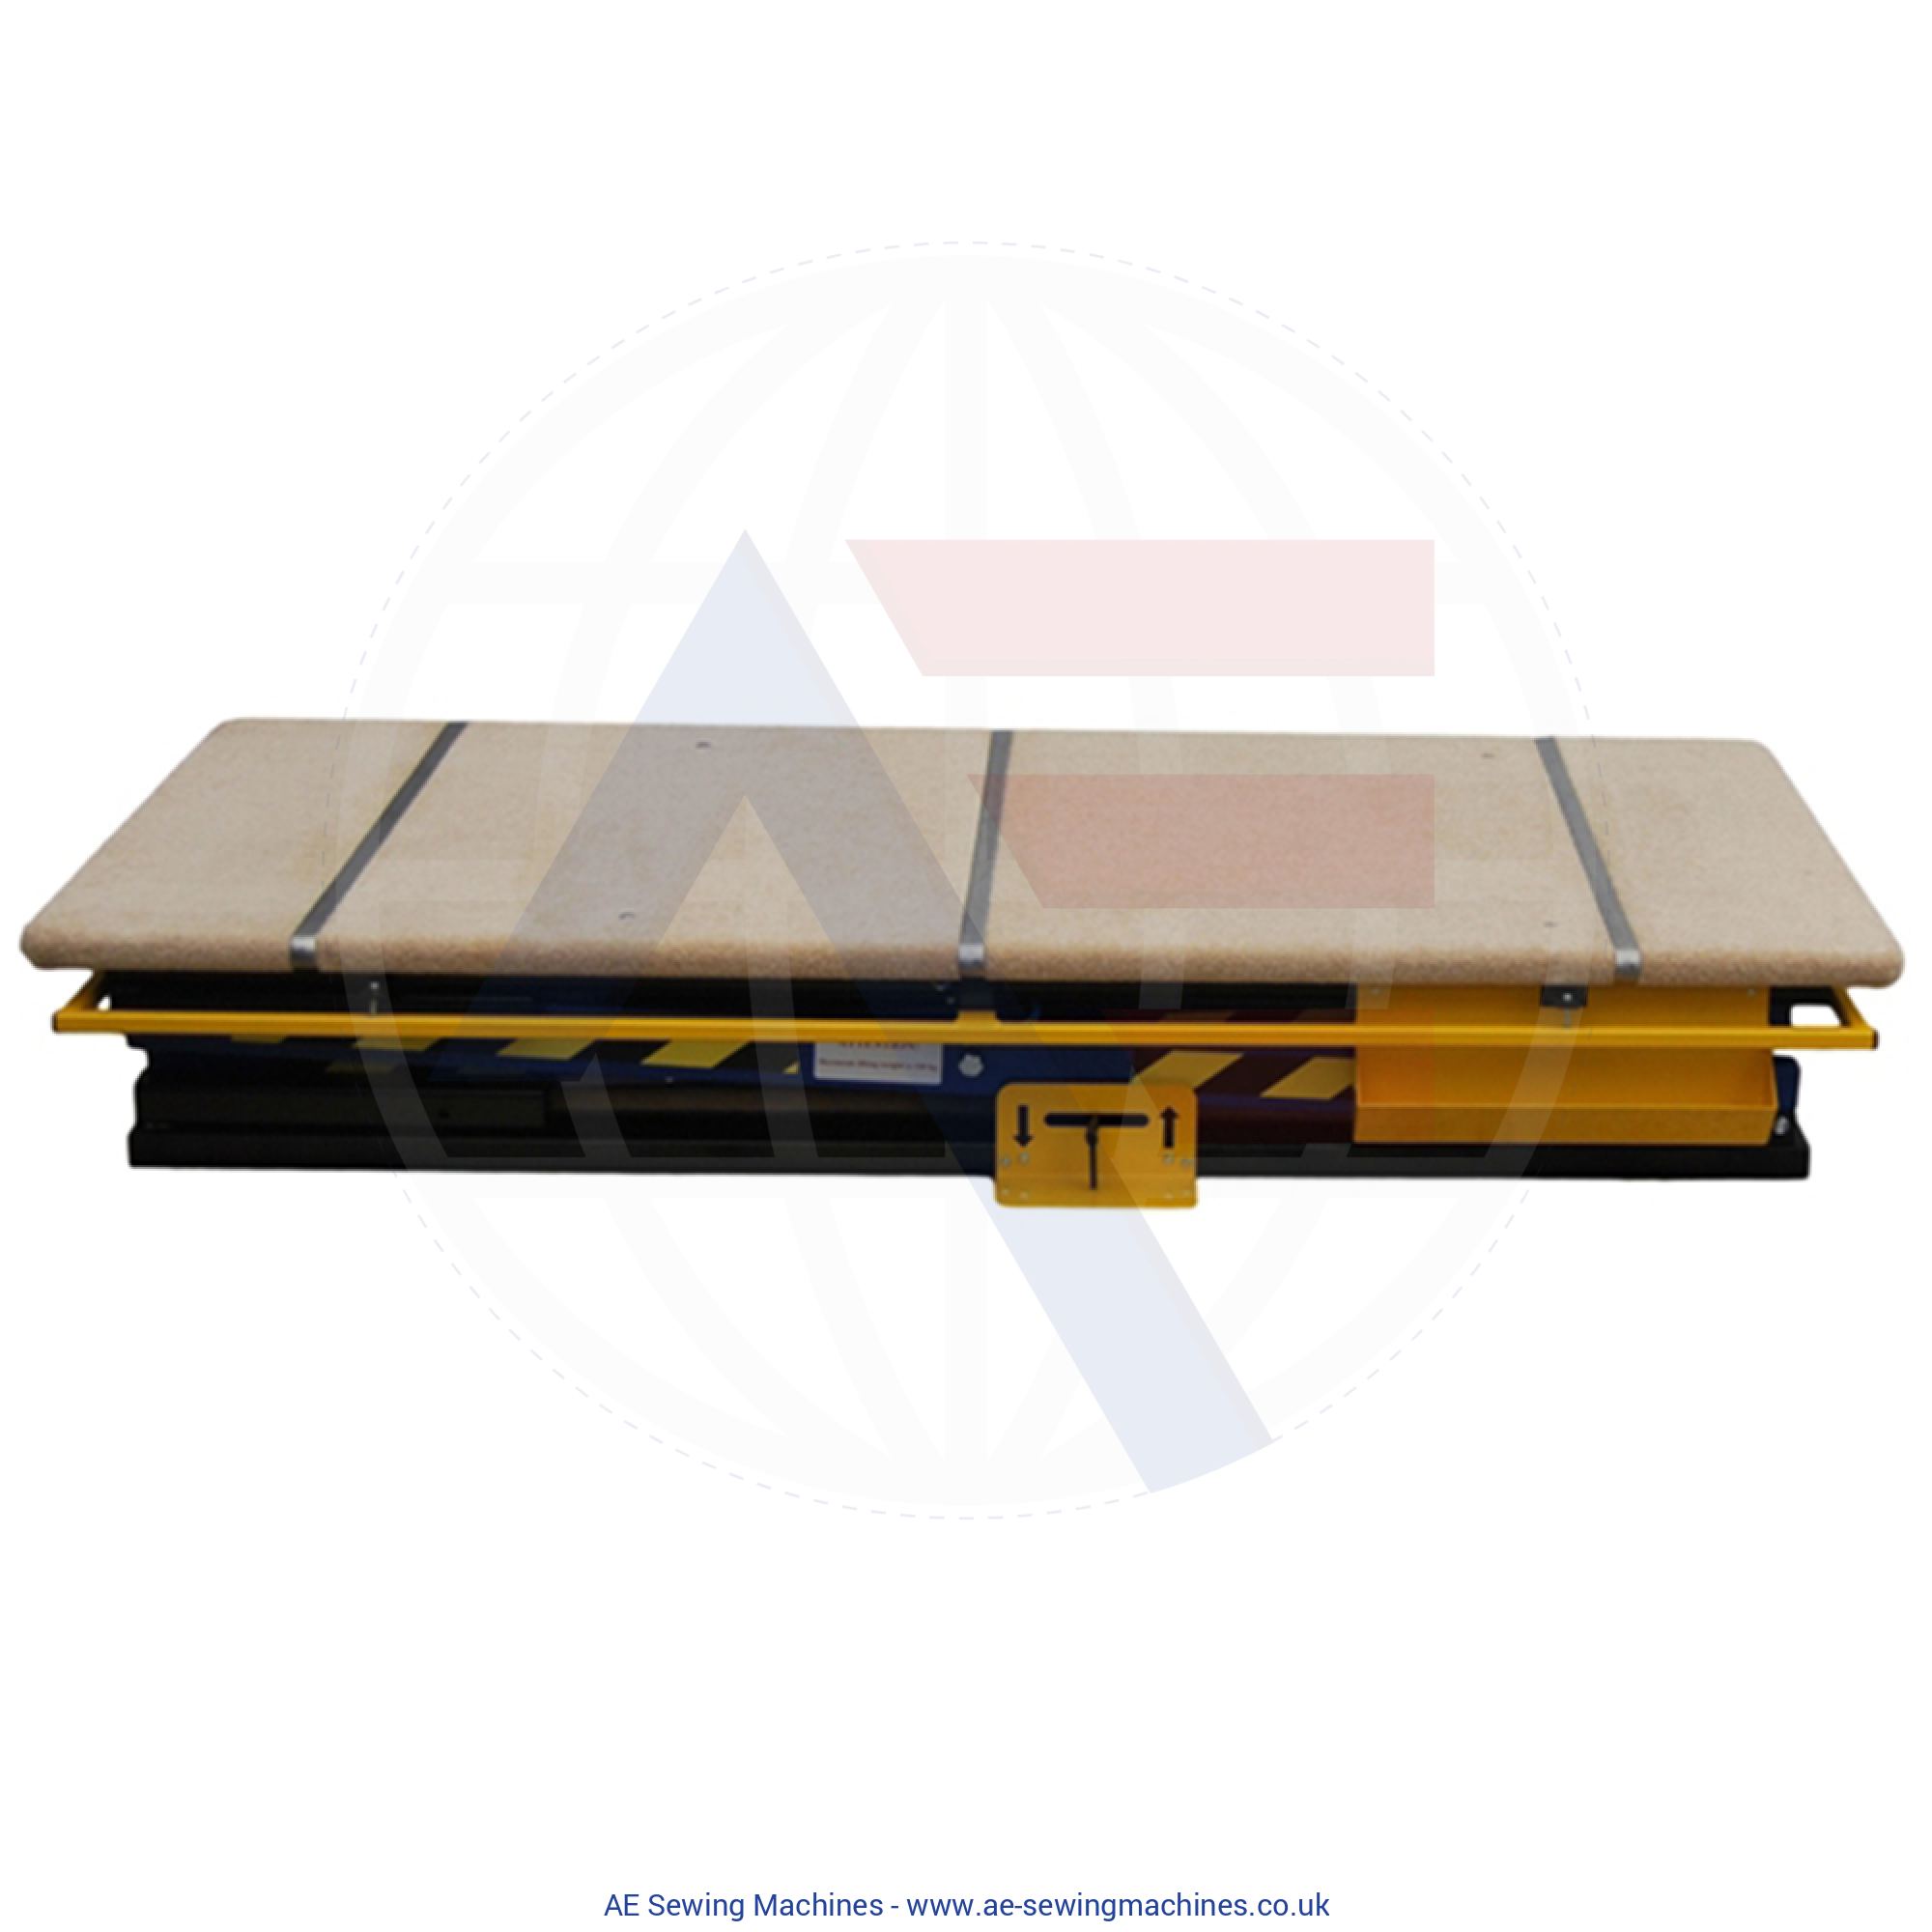 Rexel St-3/Krb Pneumatic Lifting Table Tables